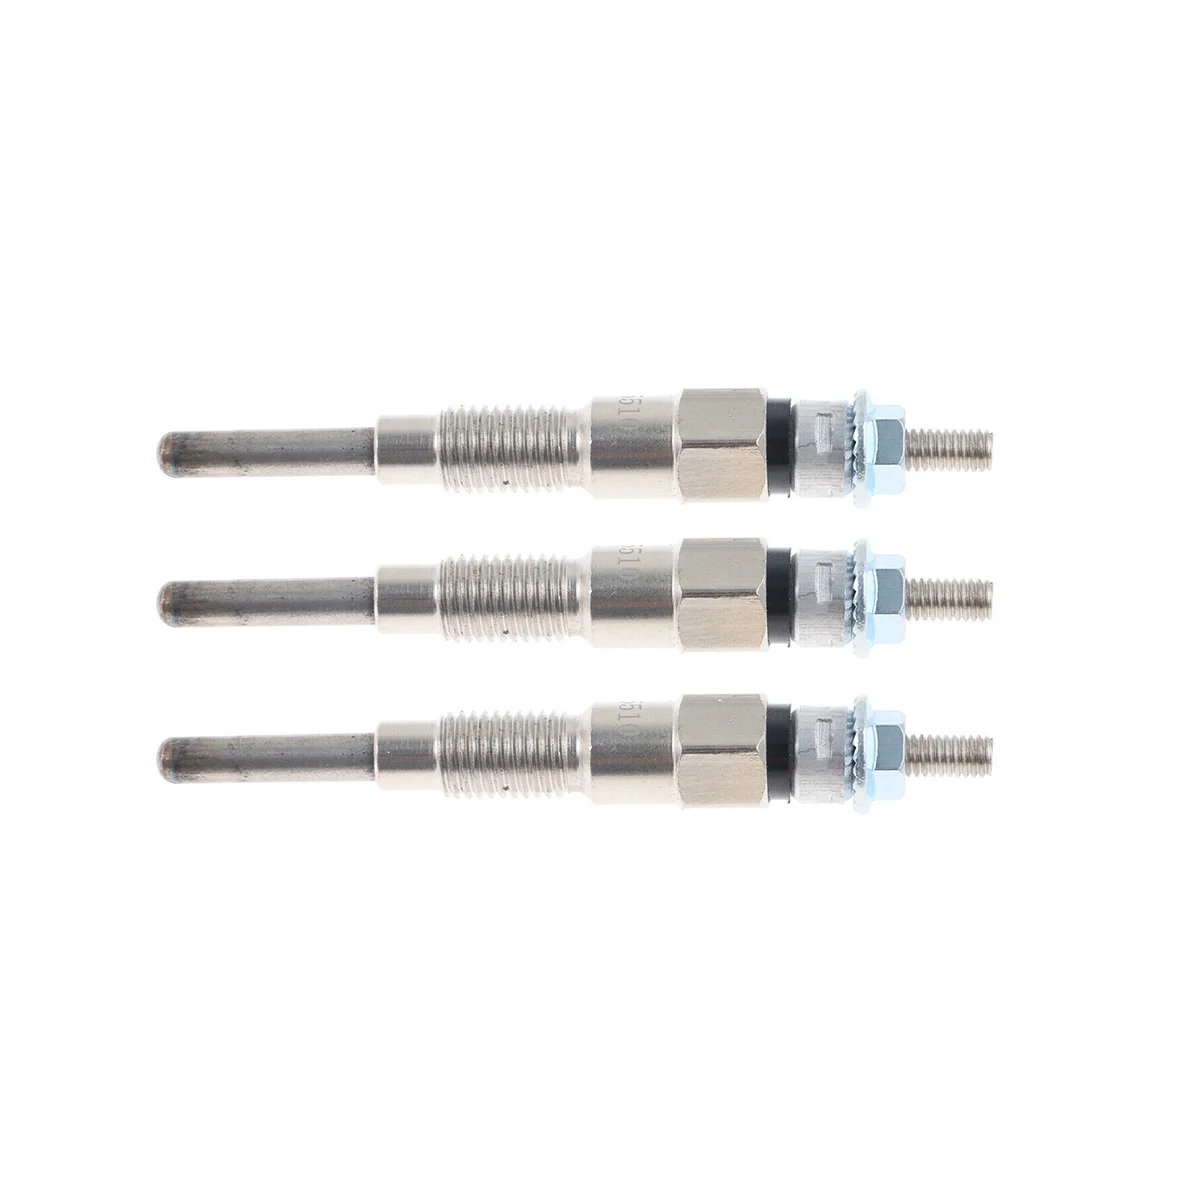 

3PCS Engine Heater Glow Plugs 8Mm for Tractor B21 B1700D B1700E Part Number 16851-65512